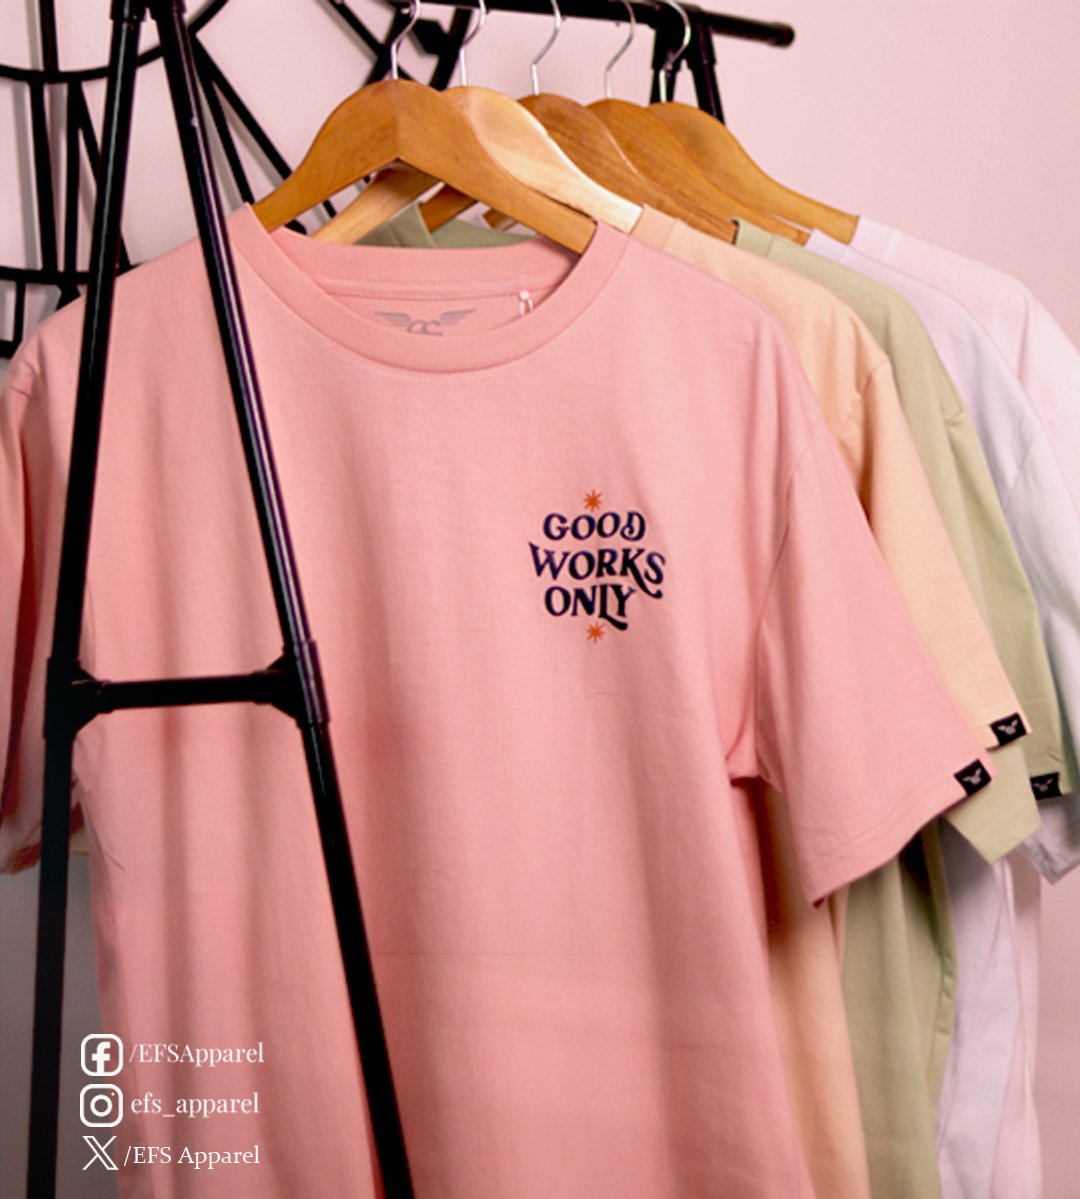 EFS Apparel's Statement Shirt 'Good Works Only' is now available. Grab yours today for only P499.00 and spread the positivity! 💙💛
#SpreadLove #StatementShirt #WearLove #GoodWorks #EFSApparel